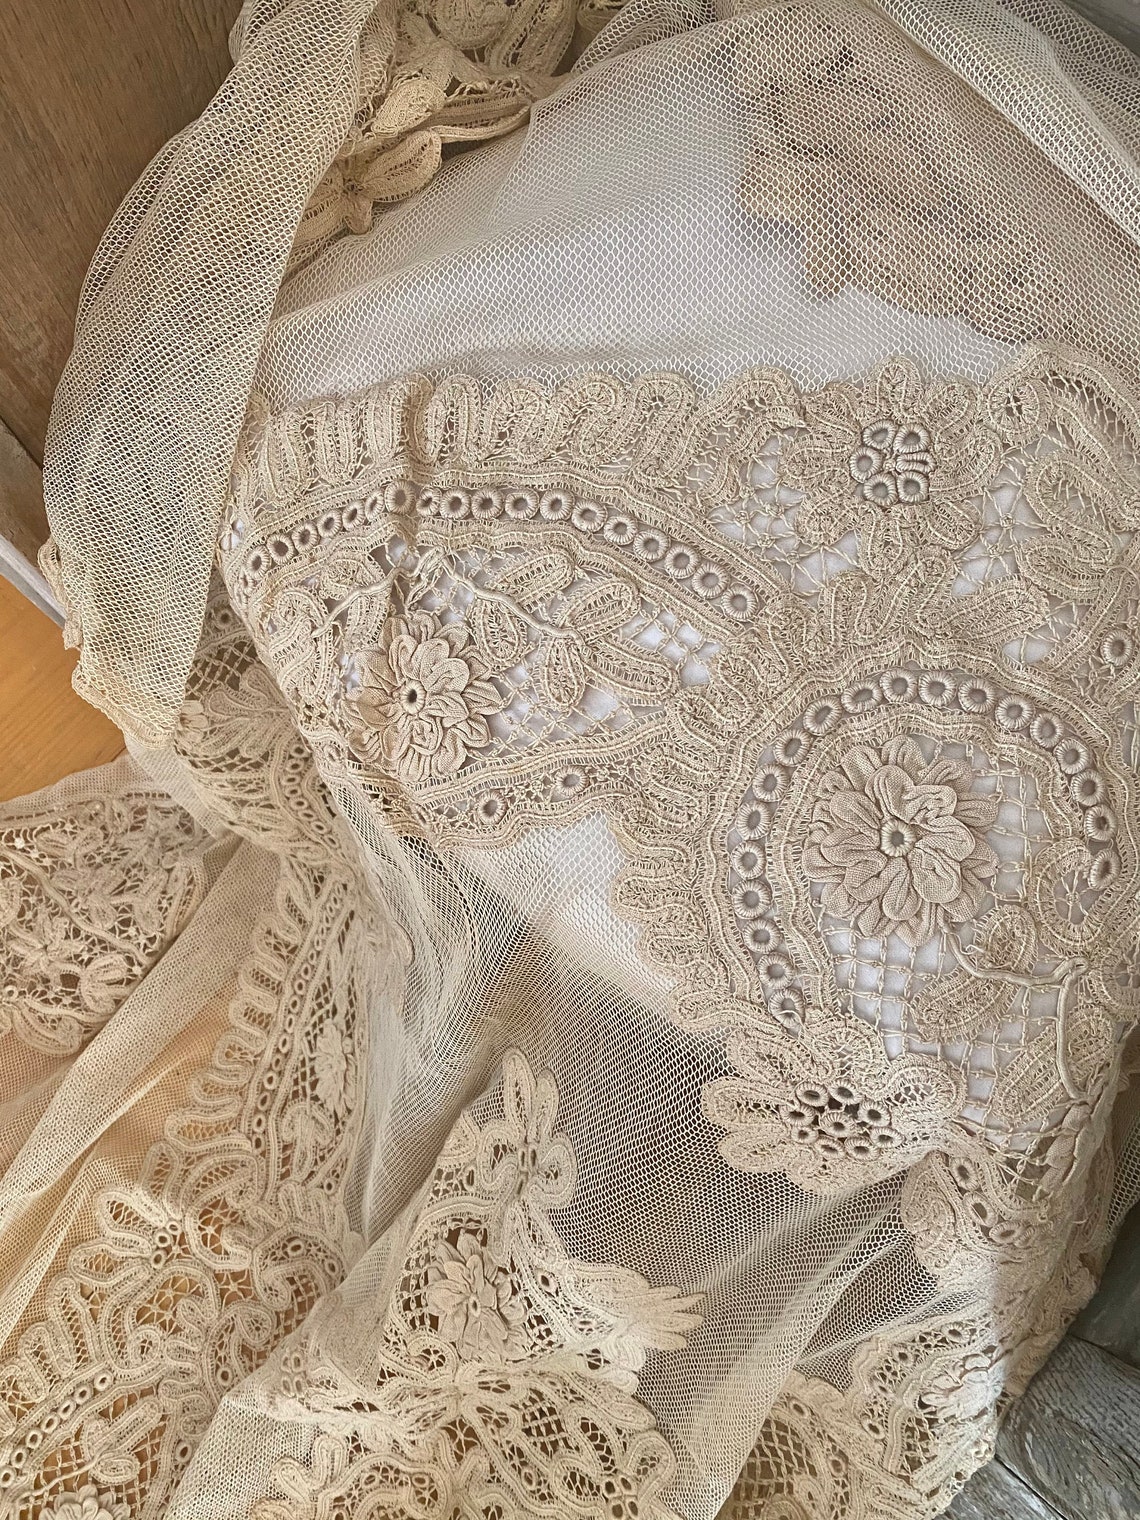 Gorgeous French antique embroidered tambour lace large | Etsy